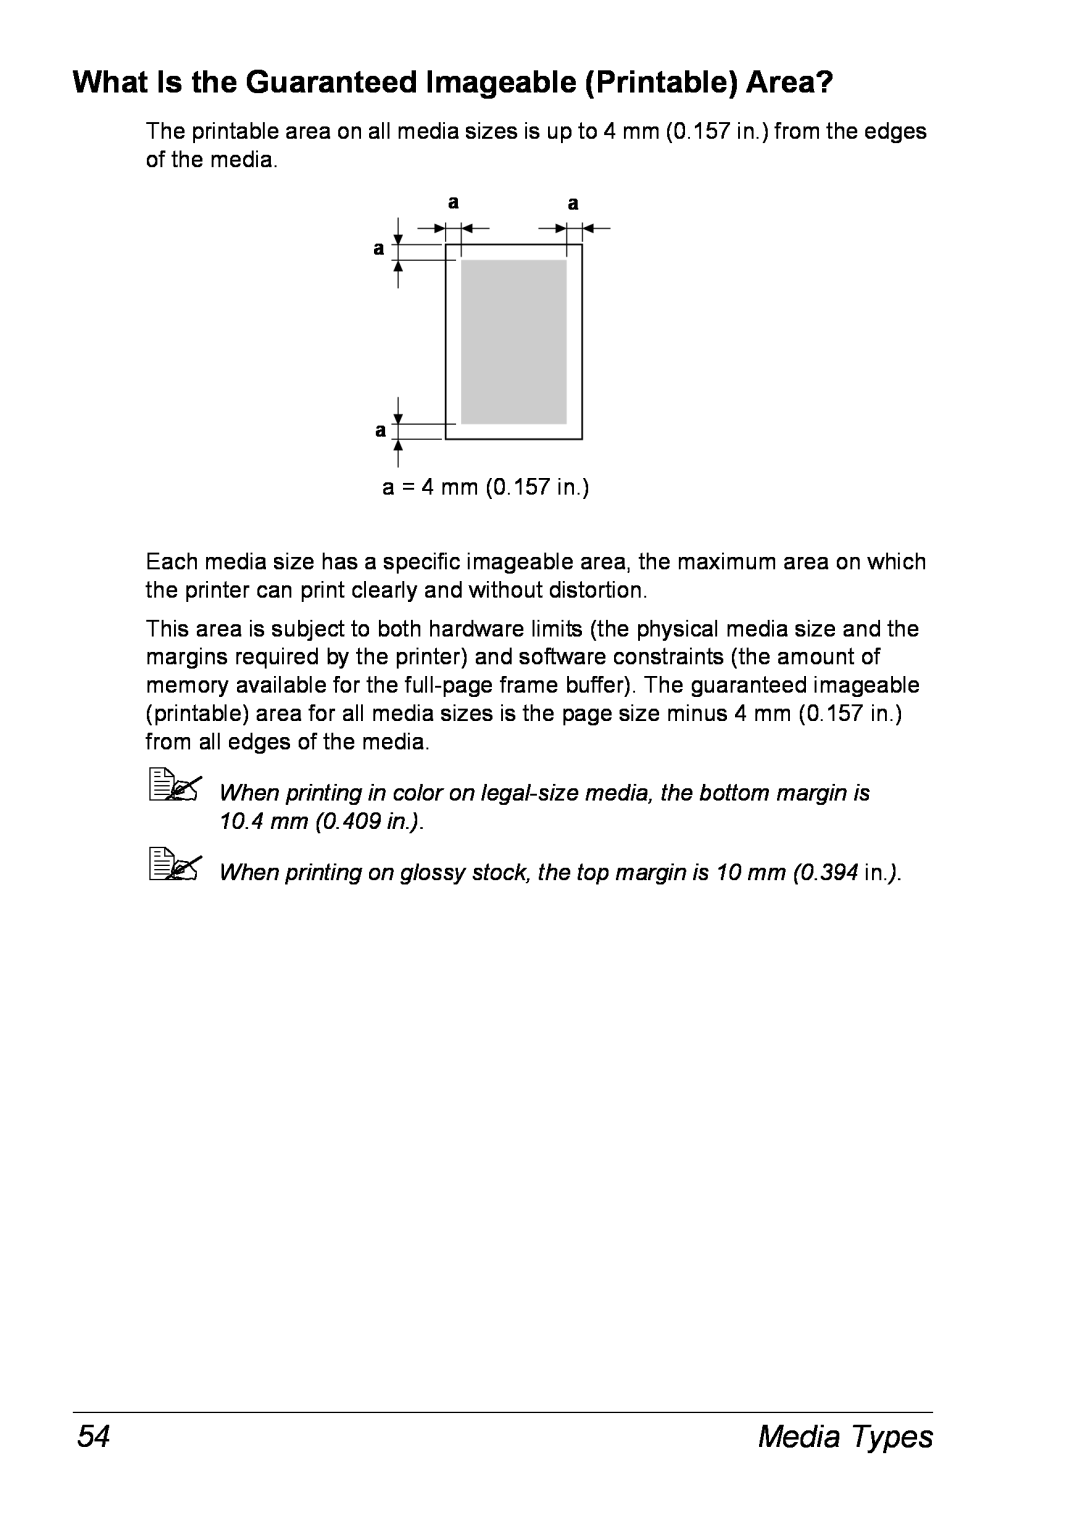 Xerox 6120 manual What Is the Guaranteed Imageable Printable Area?, Media Types 